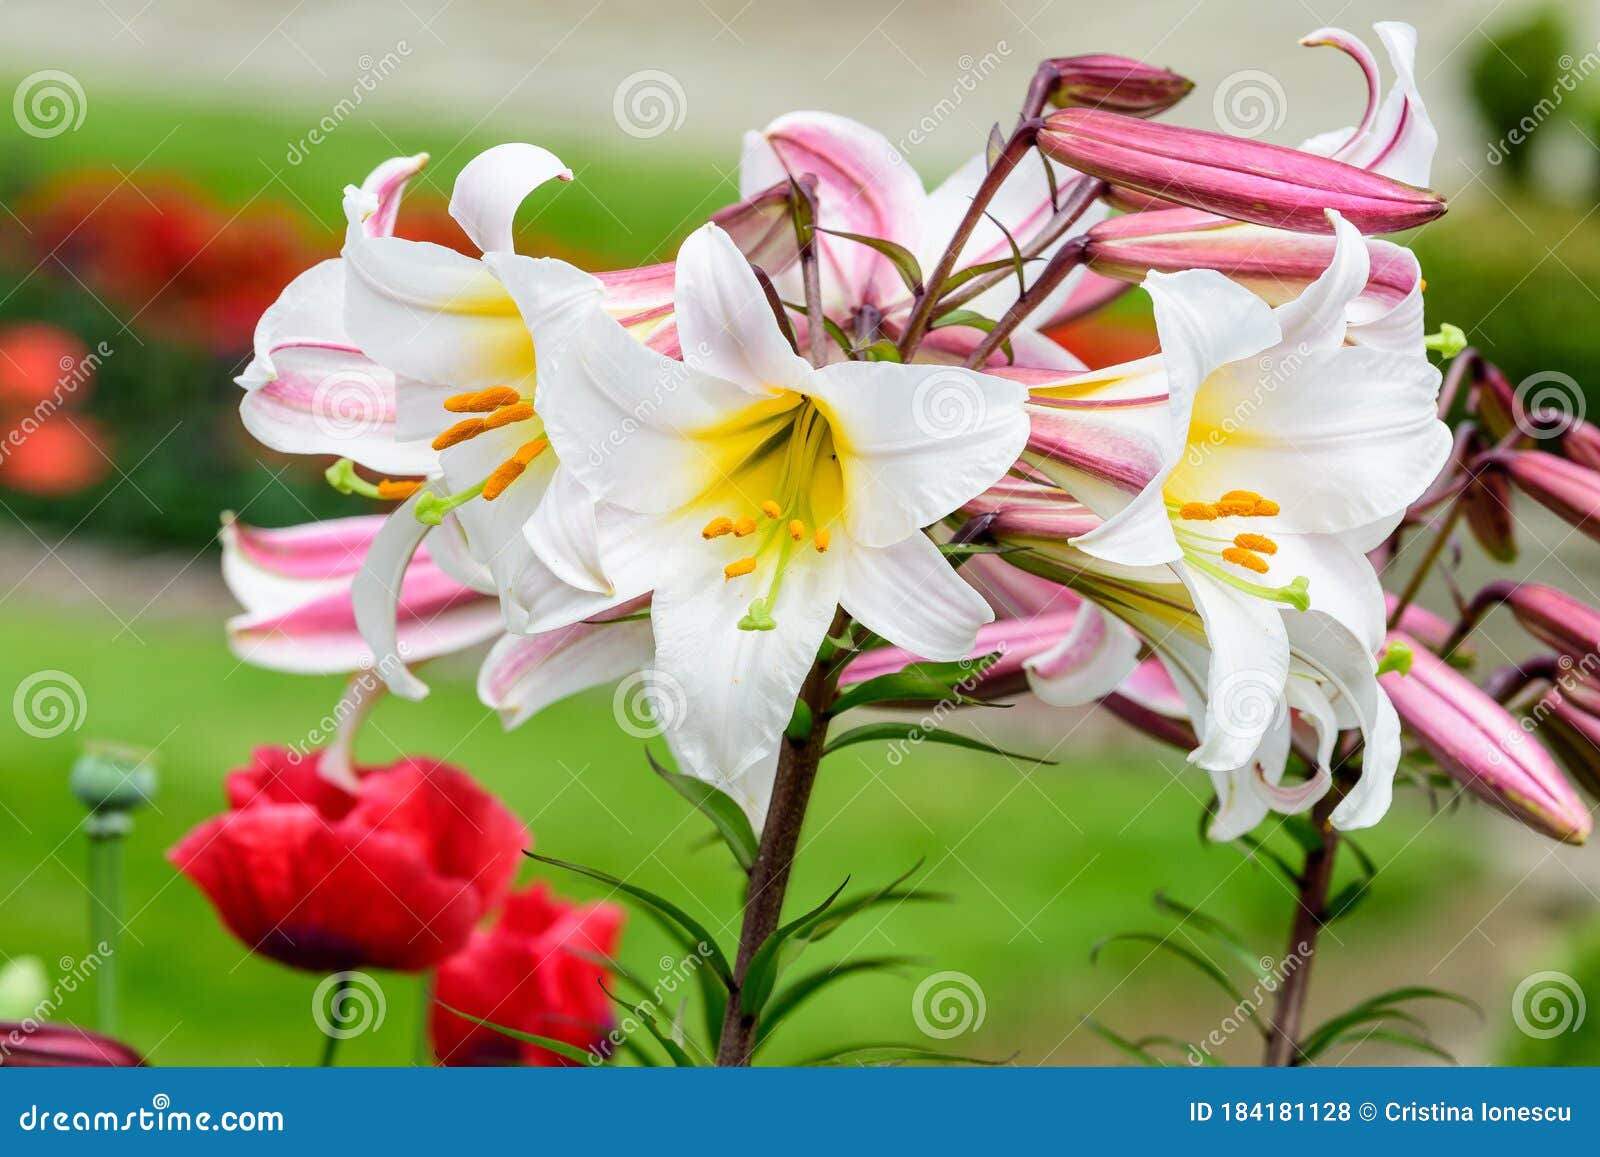 Group of Many Small White Flowers of Lilium or Lily Plant in a British ...